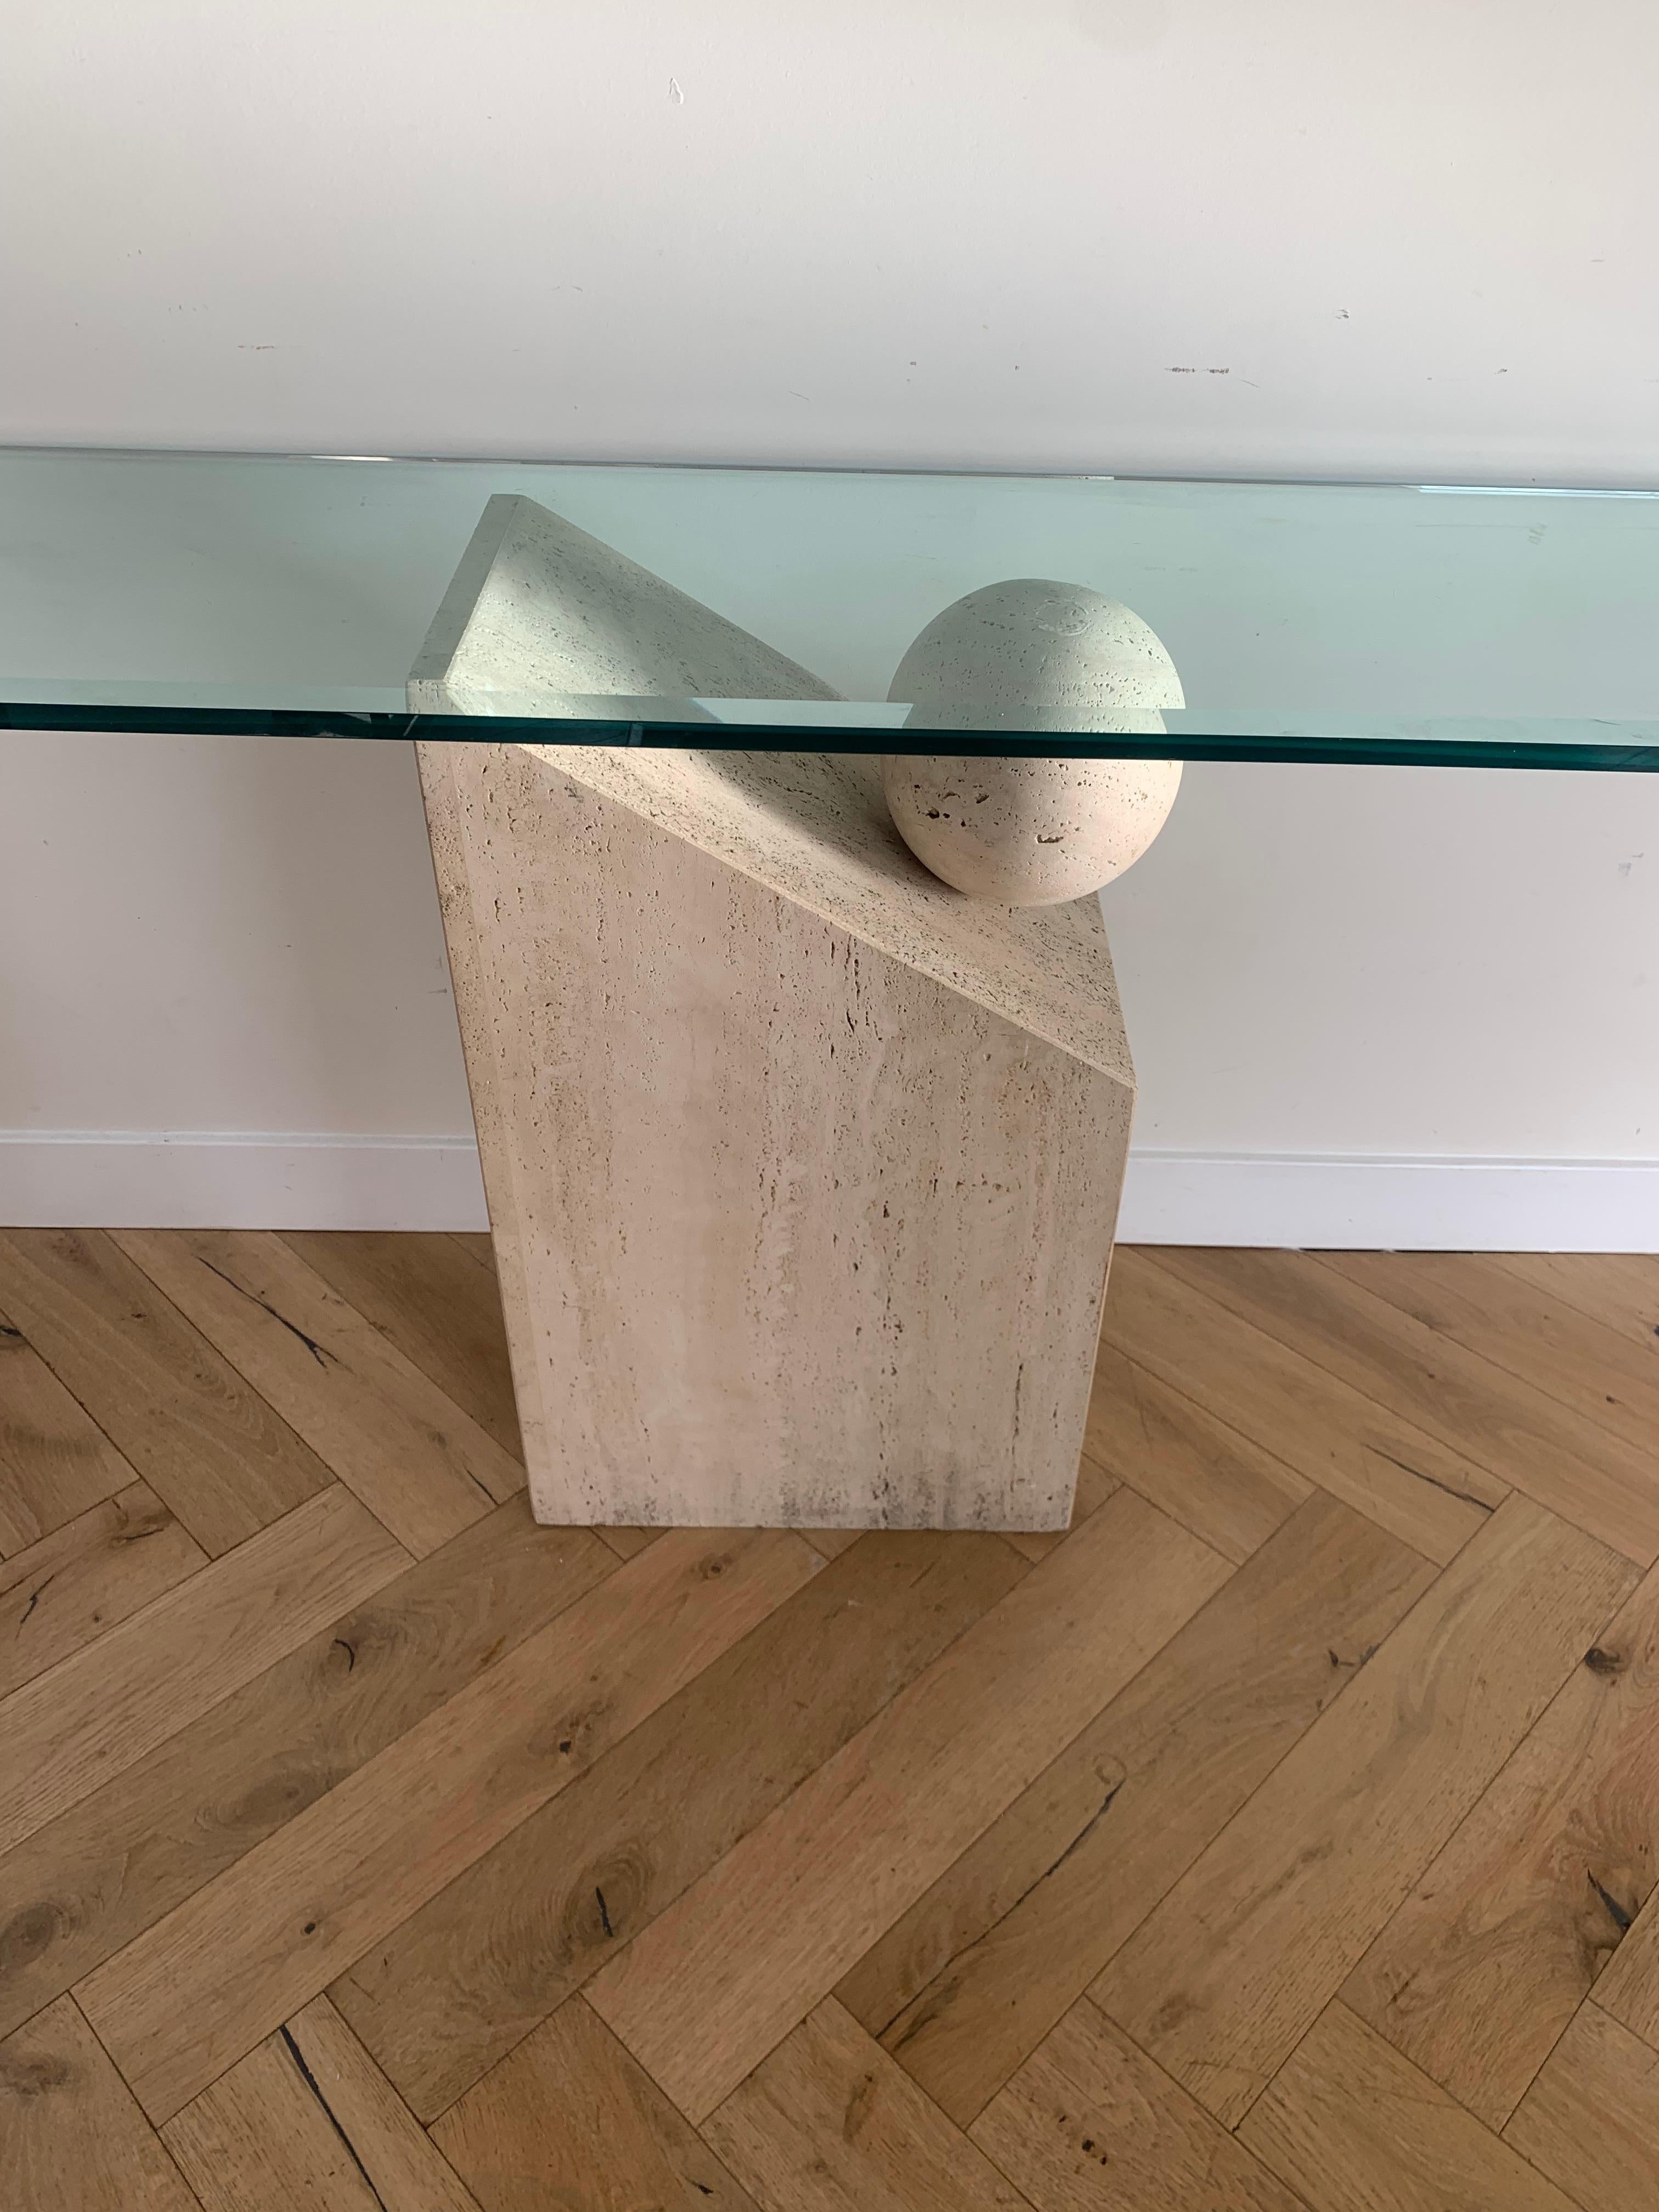 A spectacular vintage Italian postmodern console table hand-carved out of raw travertine and featuring an orb suspended on a tilted plinth, upholding a thick (.75” thick) beveled glass top. From Italy, circa mid 1970s. An asymmetrical tour de force